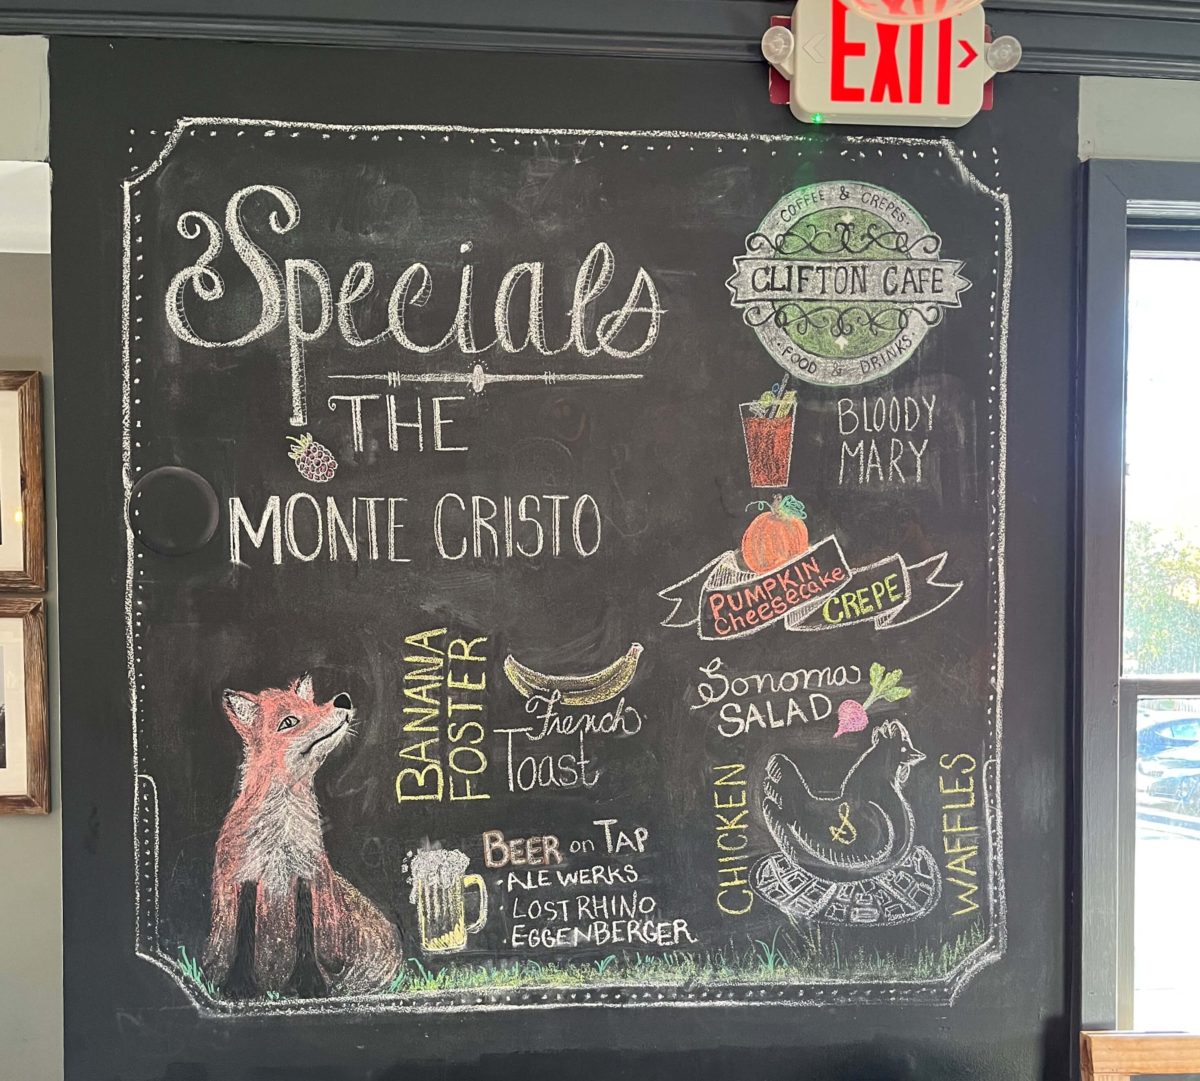 the Clifton Café specials board advertises the Monte Cristo, Bloody Mary, and Pumpkin Cheesecake Crepes